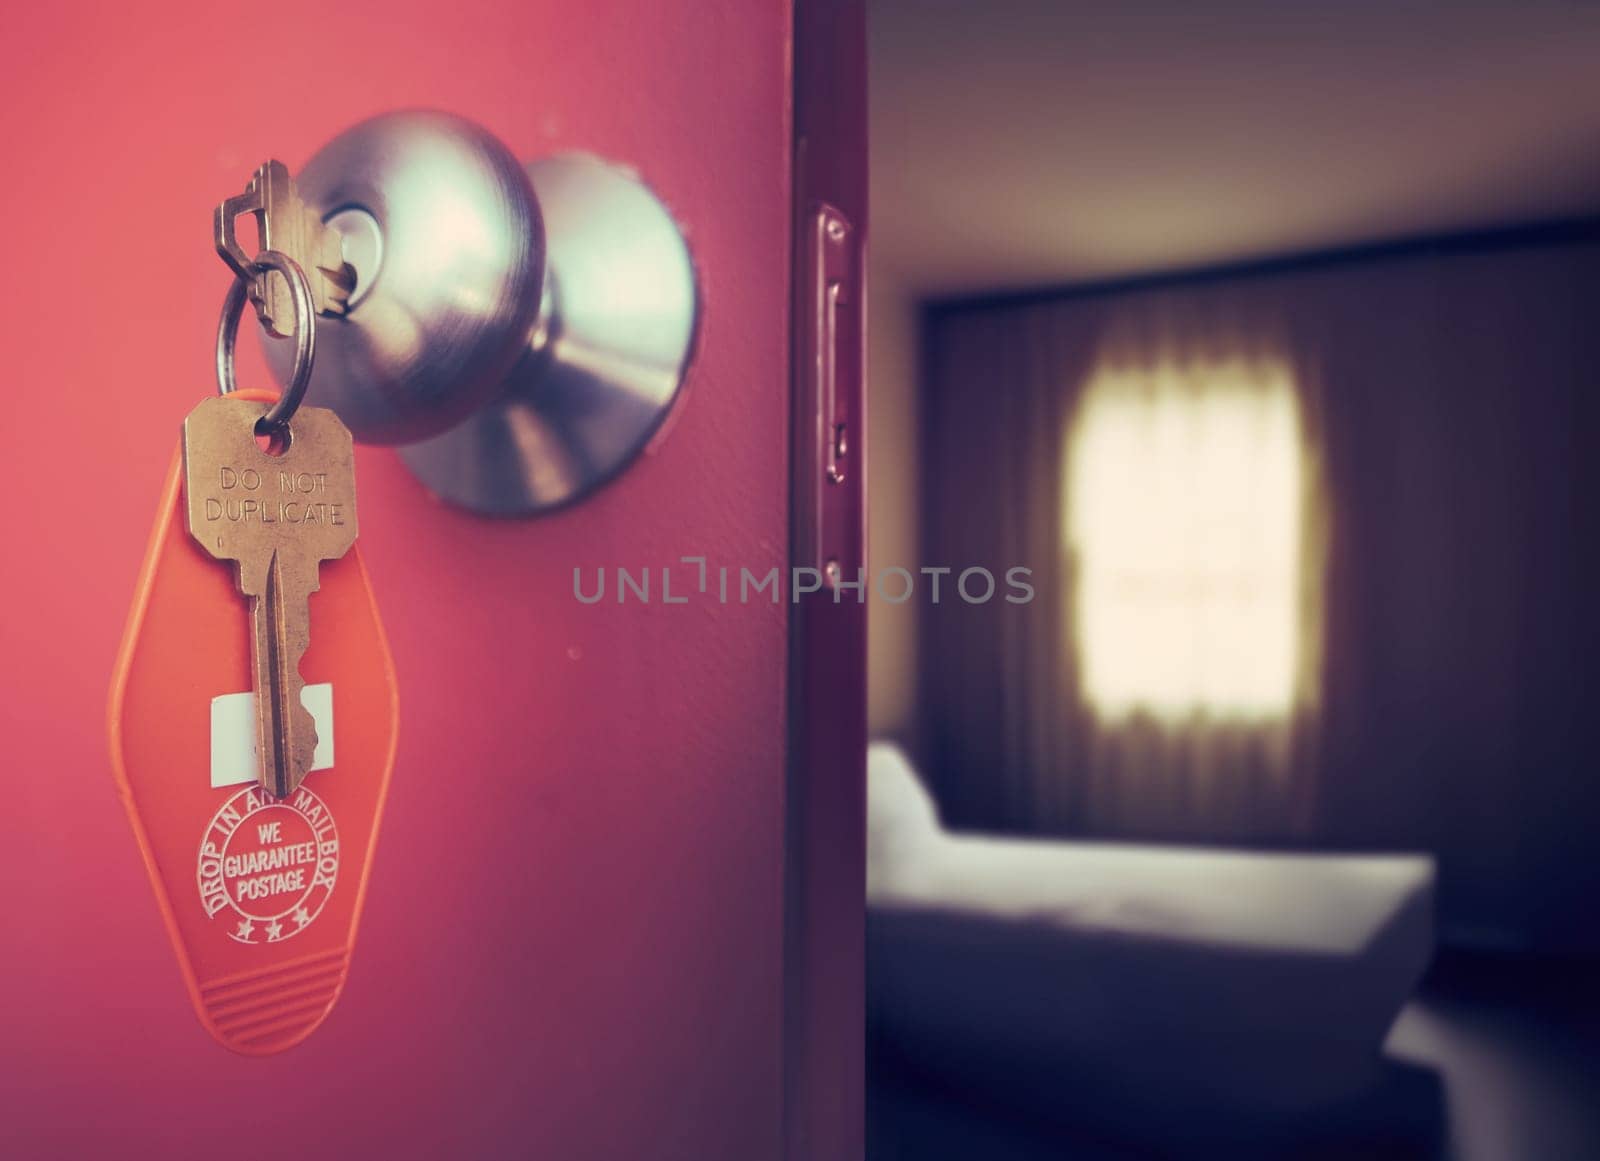 A Retro 70s Era USA Motel Room With Focus On The Key In The Door